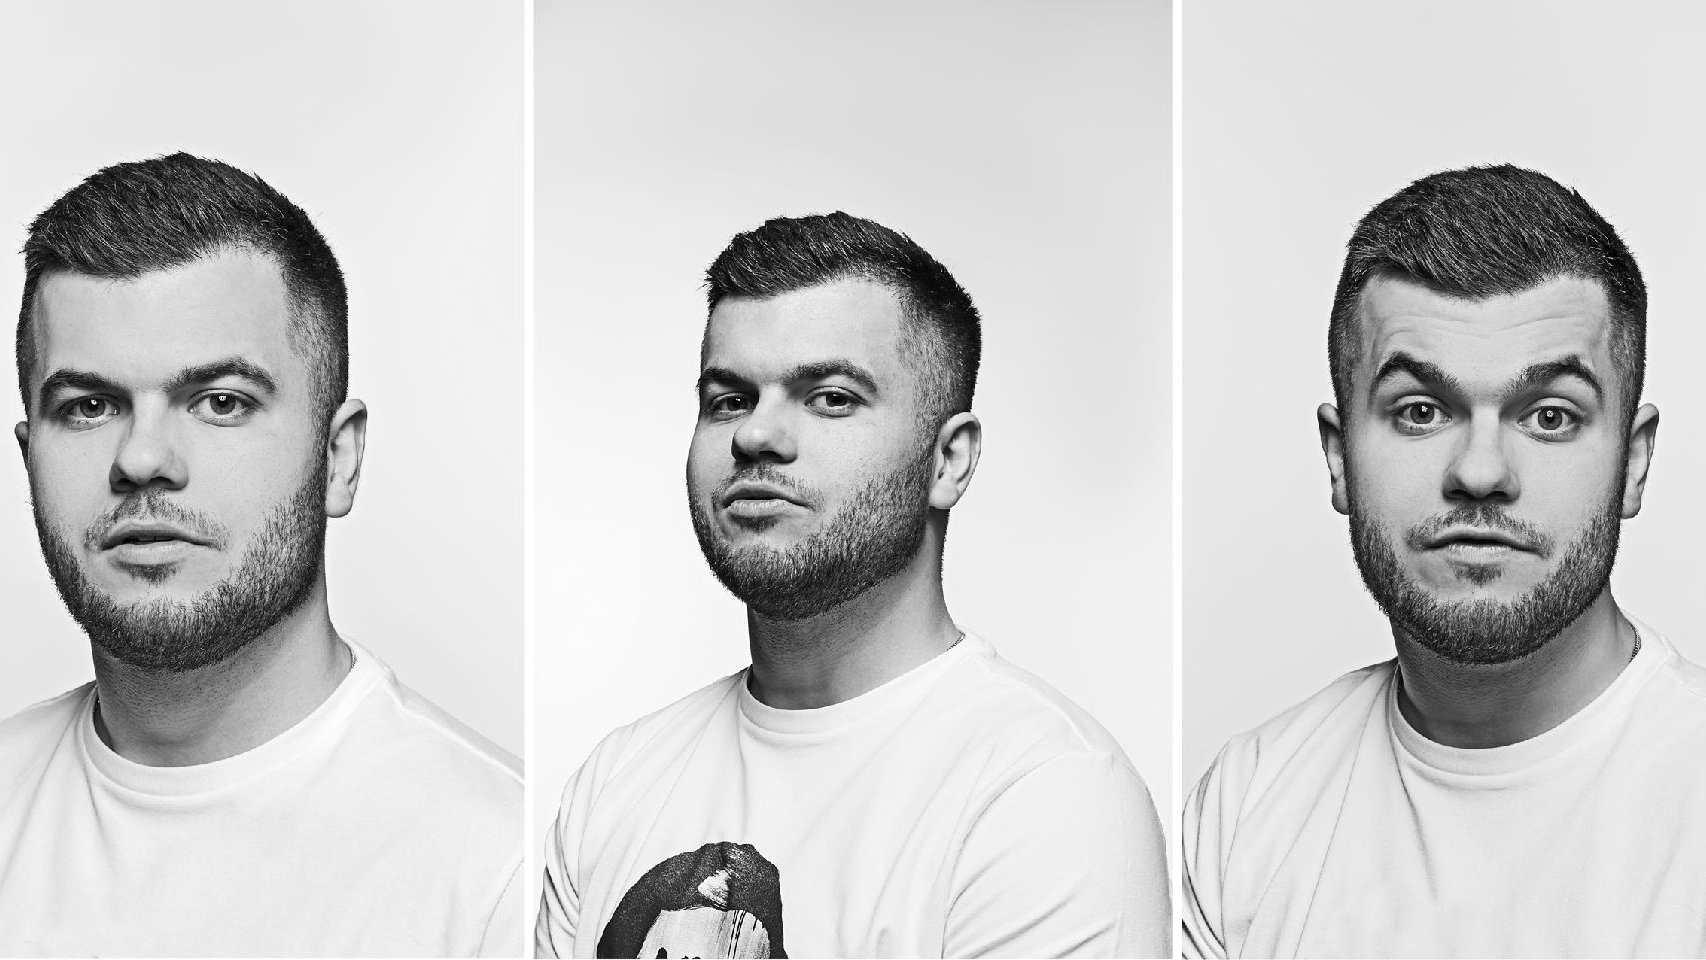 3 black and white photos of Łukasz Ojdana, who is looking at the camera with various facial expressions